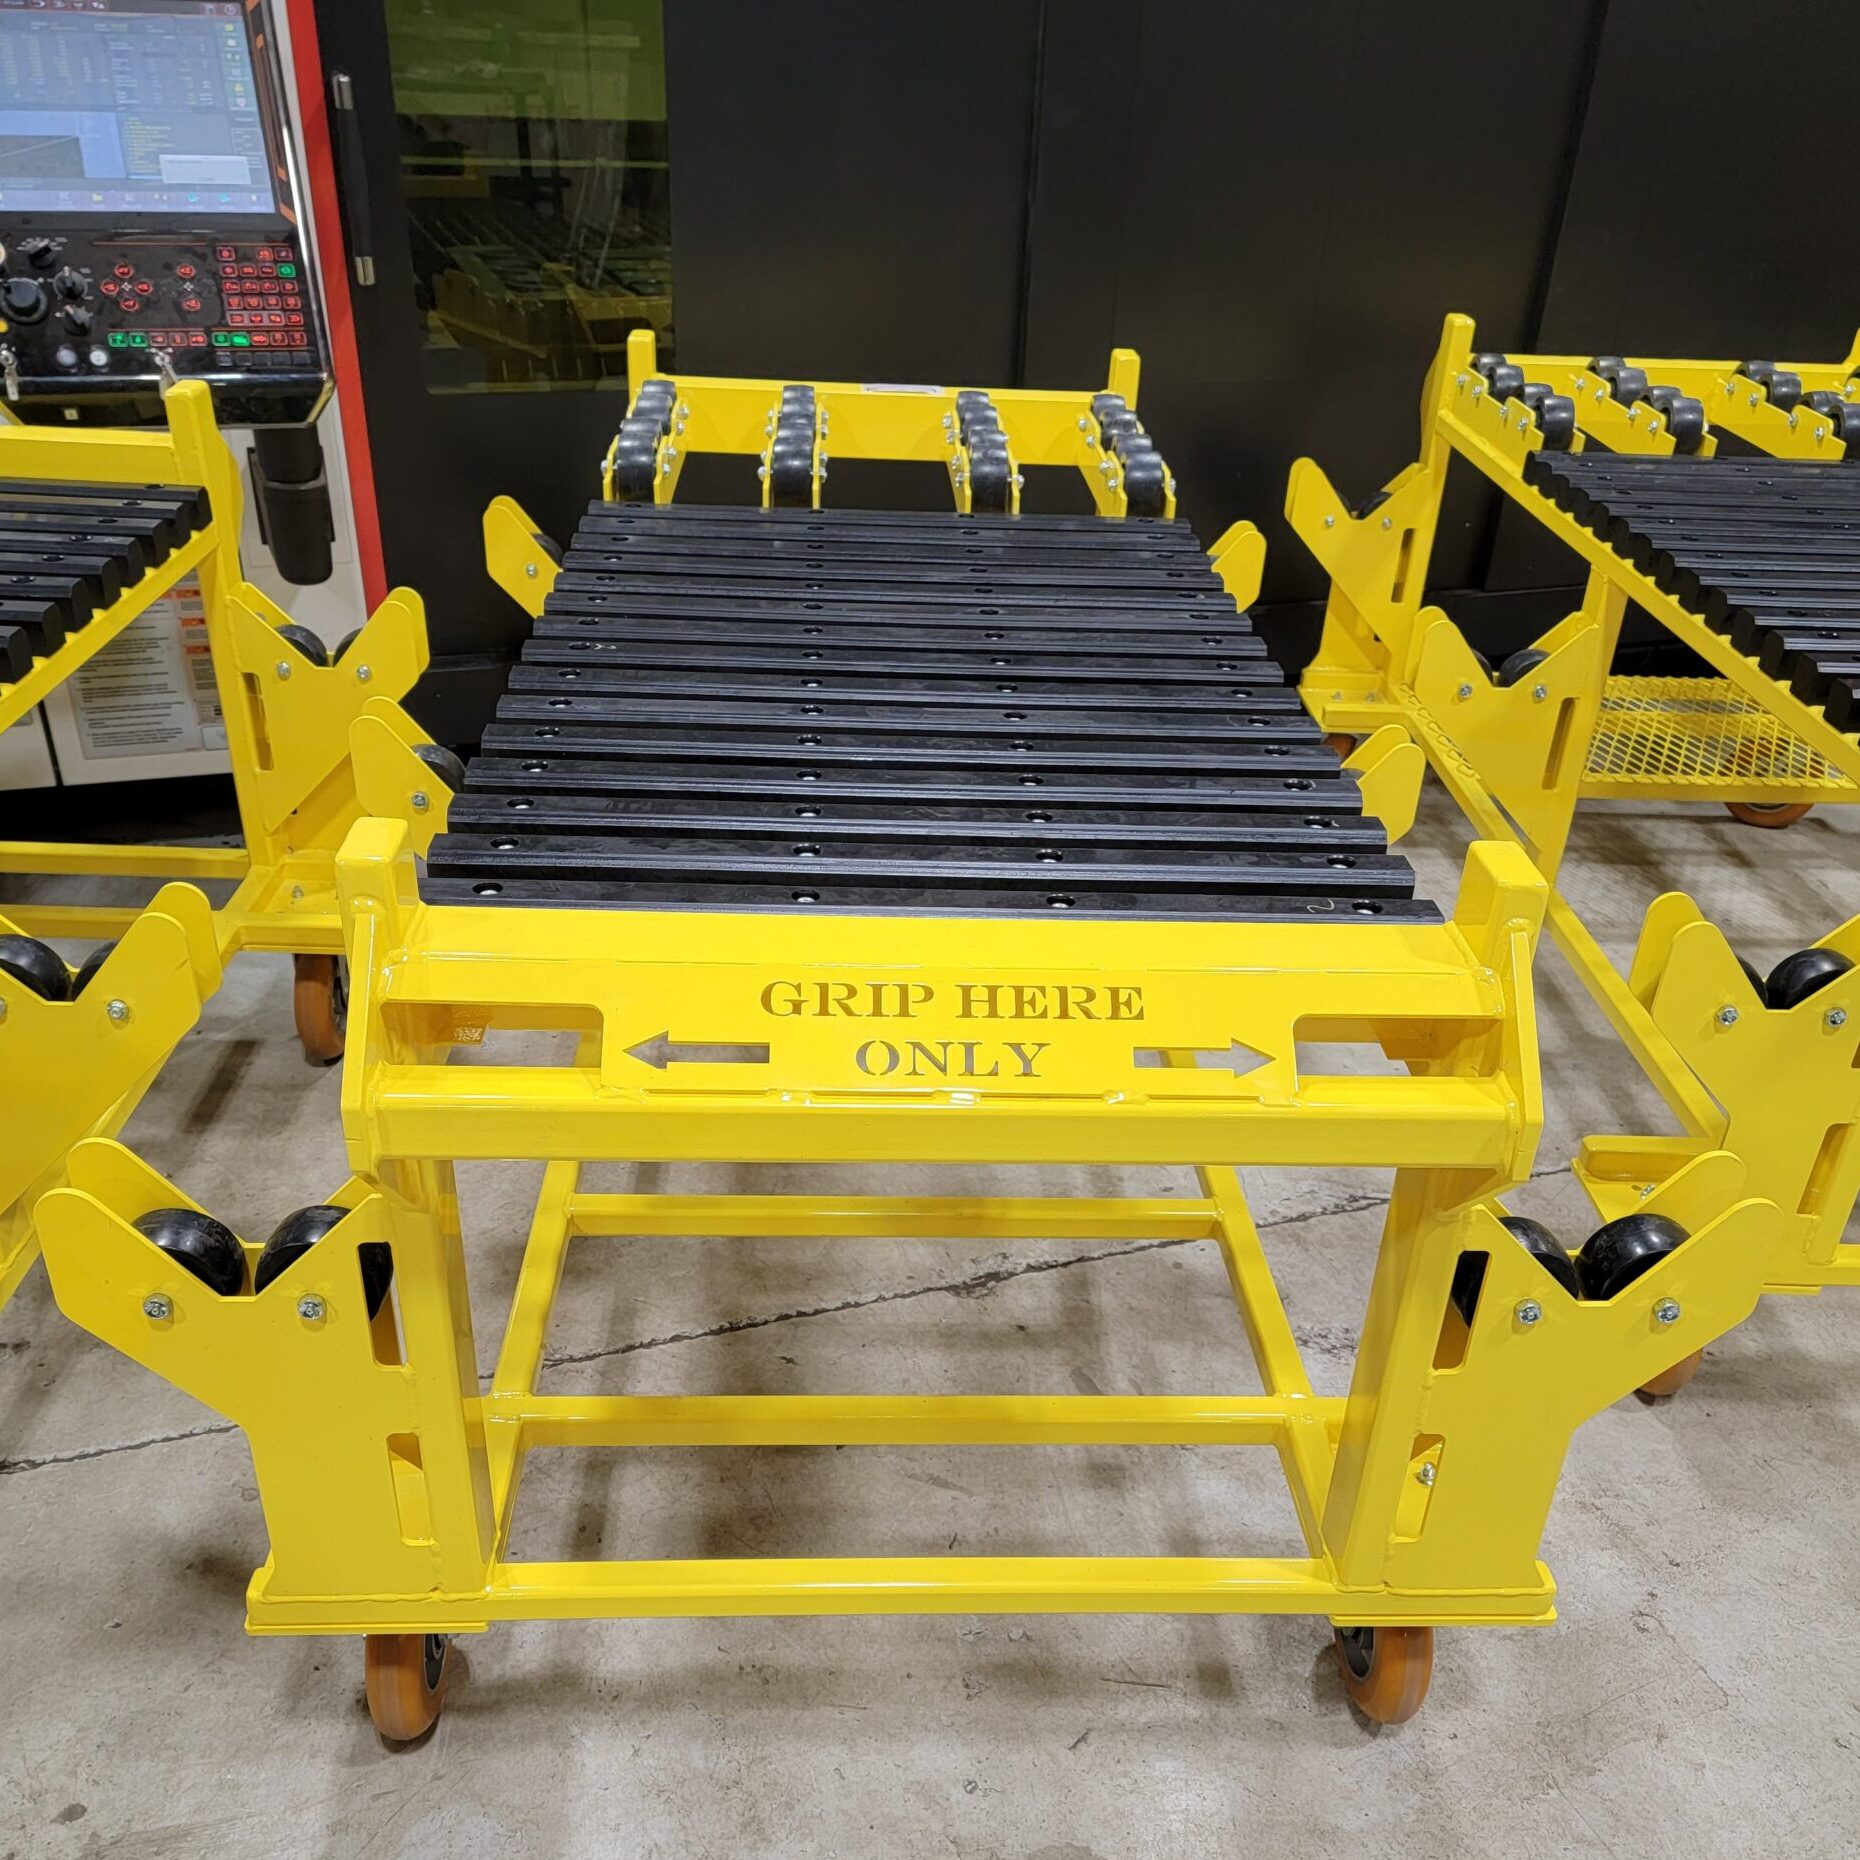 Coating & Assembly, Cart crated by Craftco Manufacturing Solutions, Sheridan, Wyoming